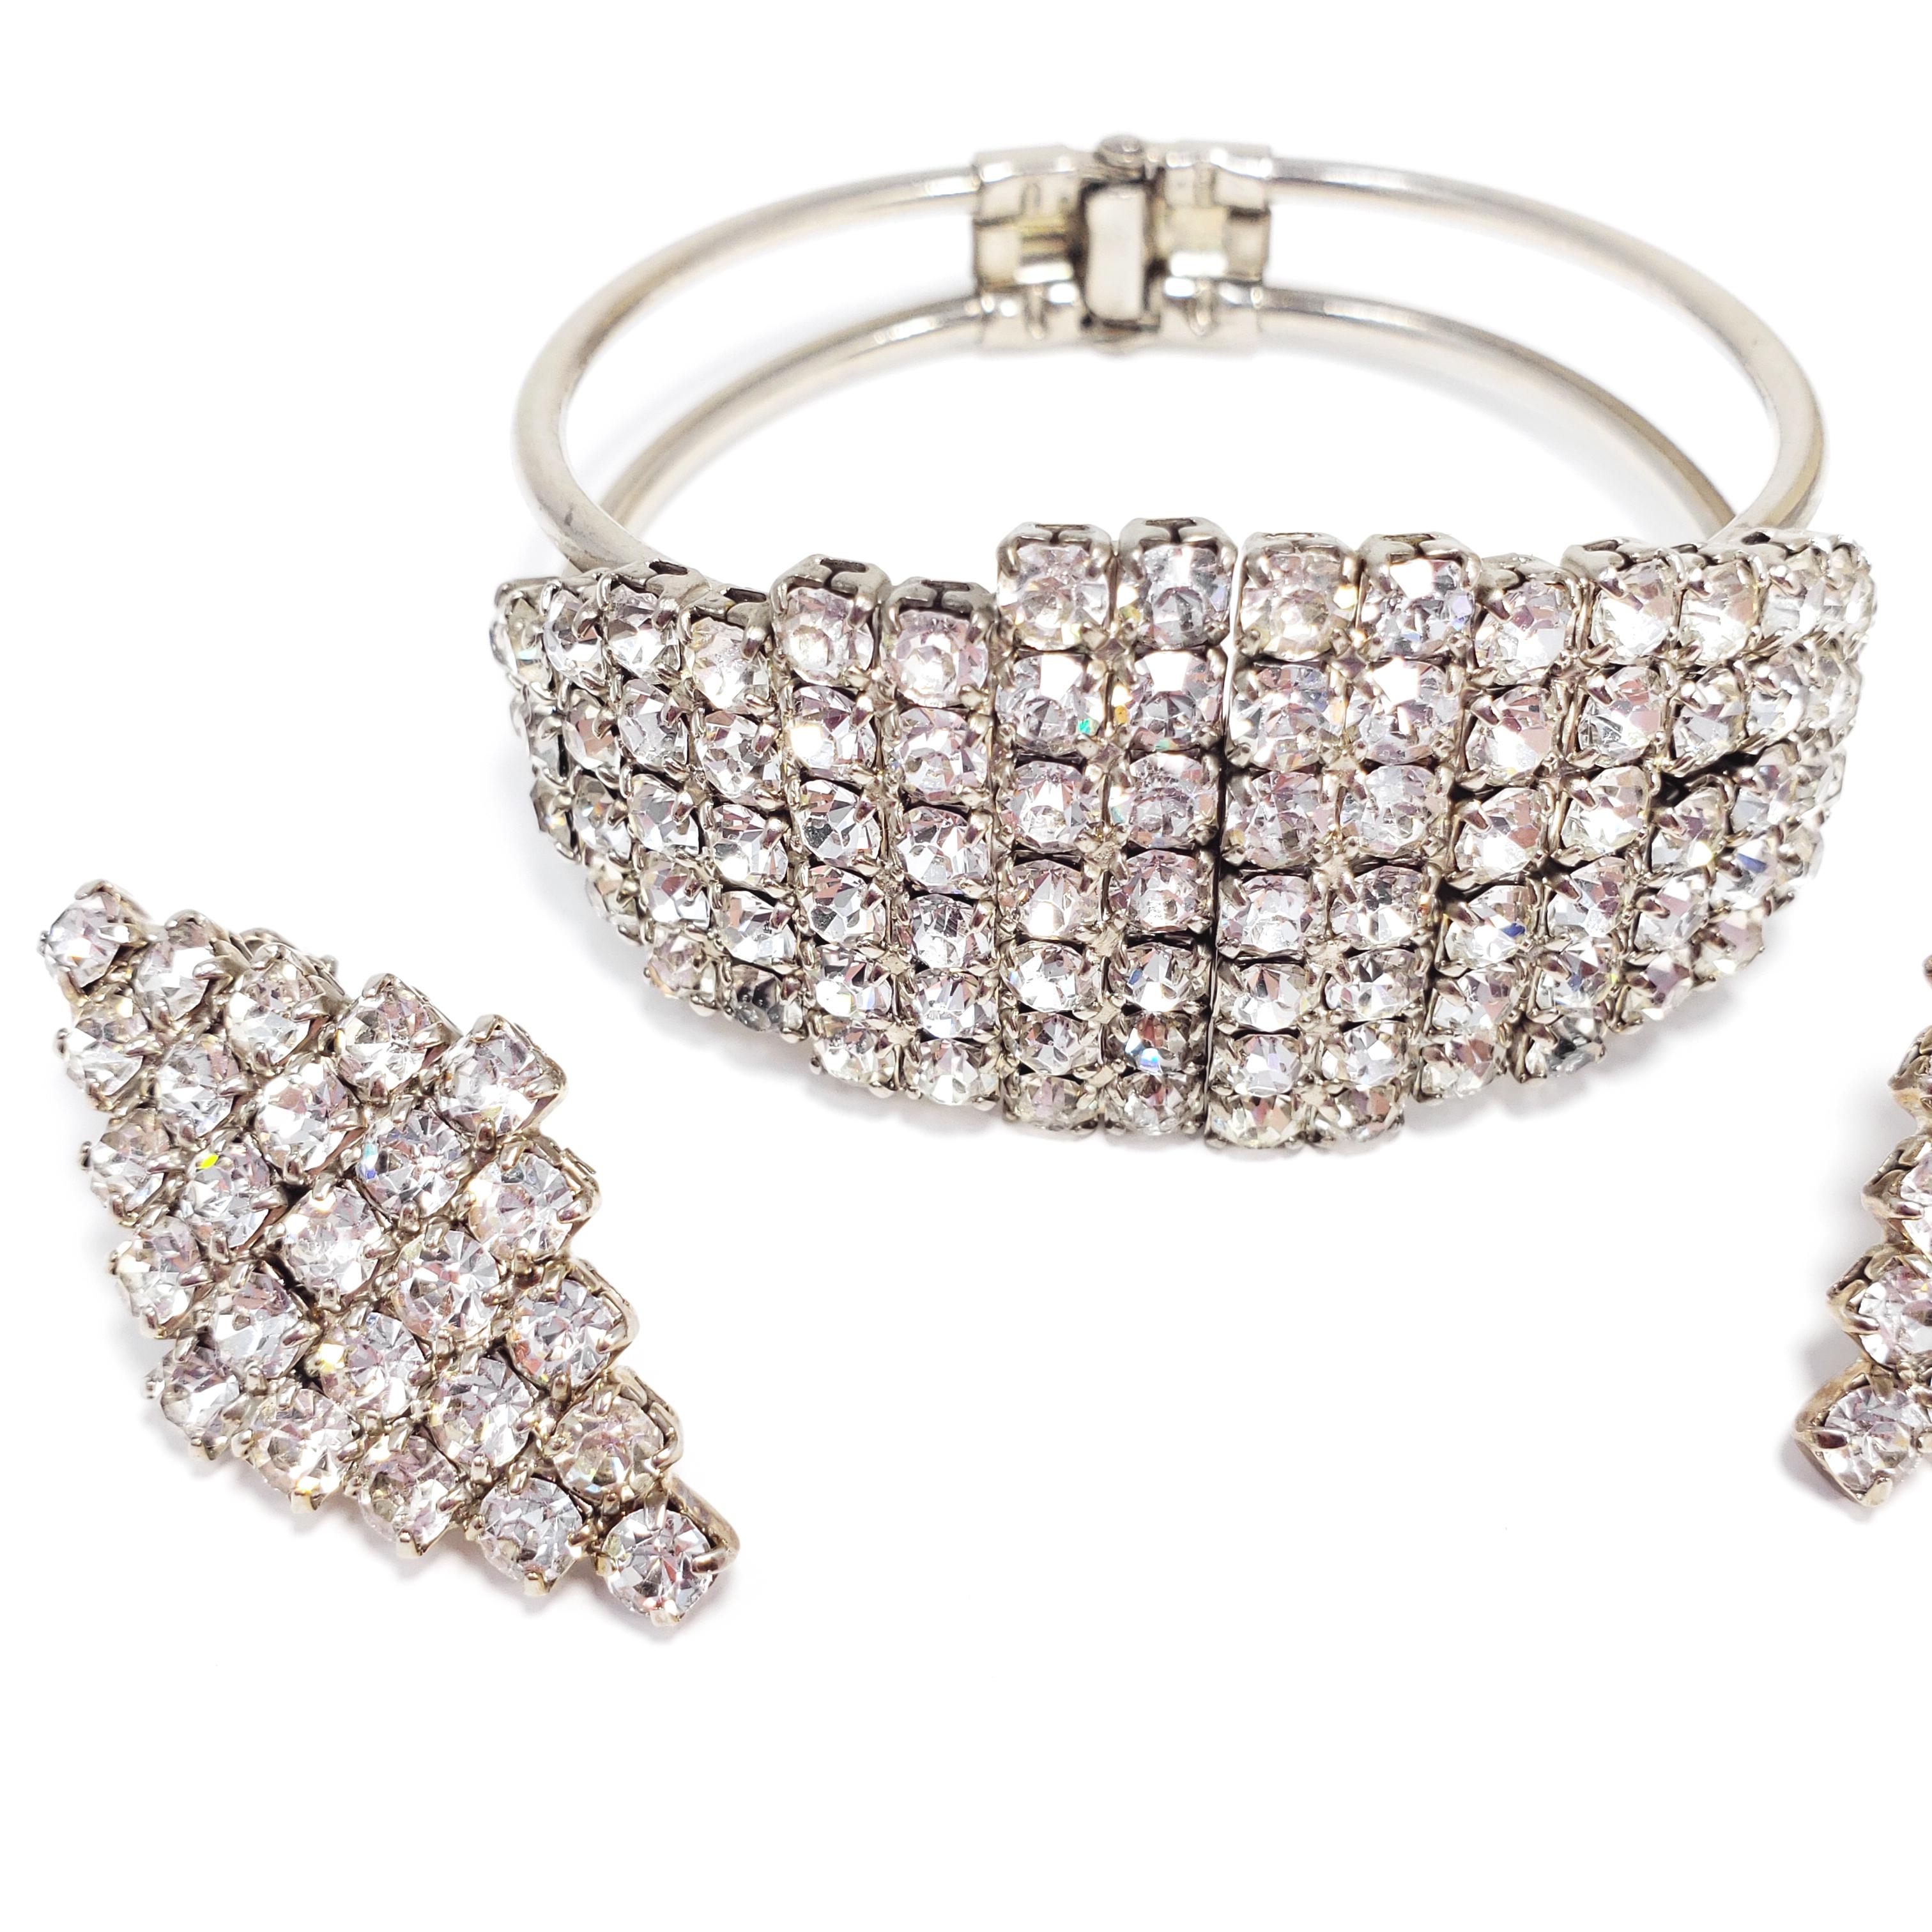 An art-deco set featuring glimmering crystals prong set in a rhodium plated setting. The matching hinged clamper bracelet and clip on earrings are decorated with geometrical pave crystal patterns.

Dimenisions:
Bracelet - 16.25 cm inner